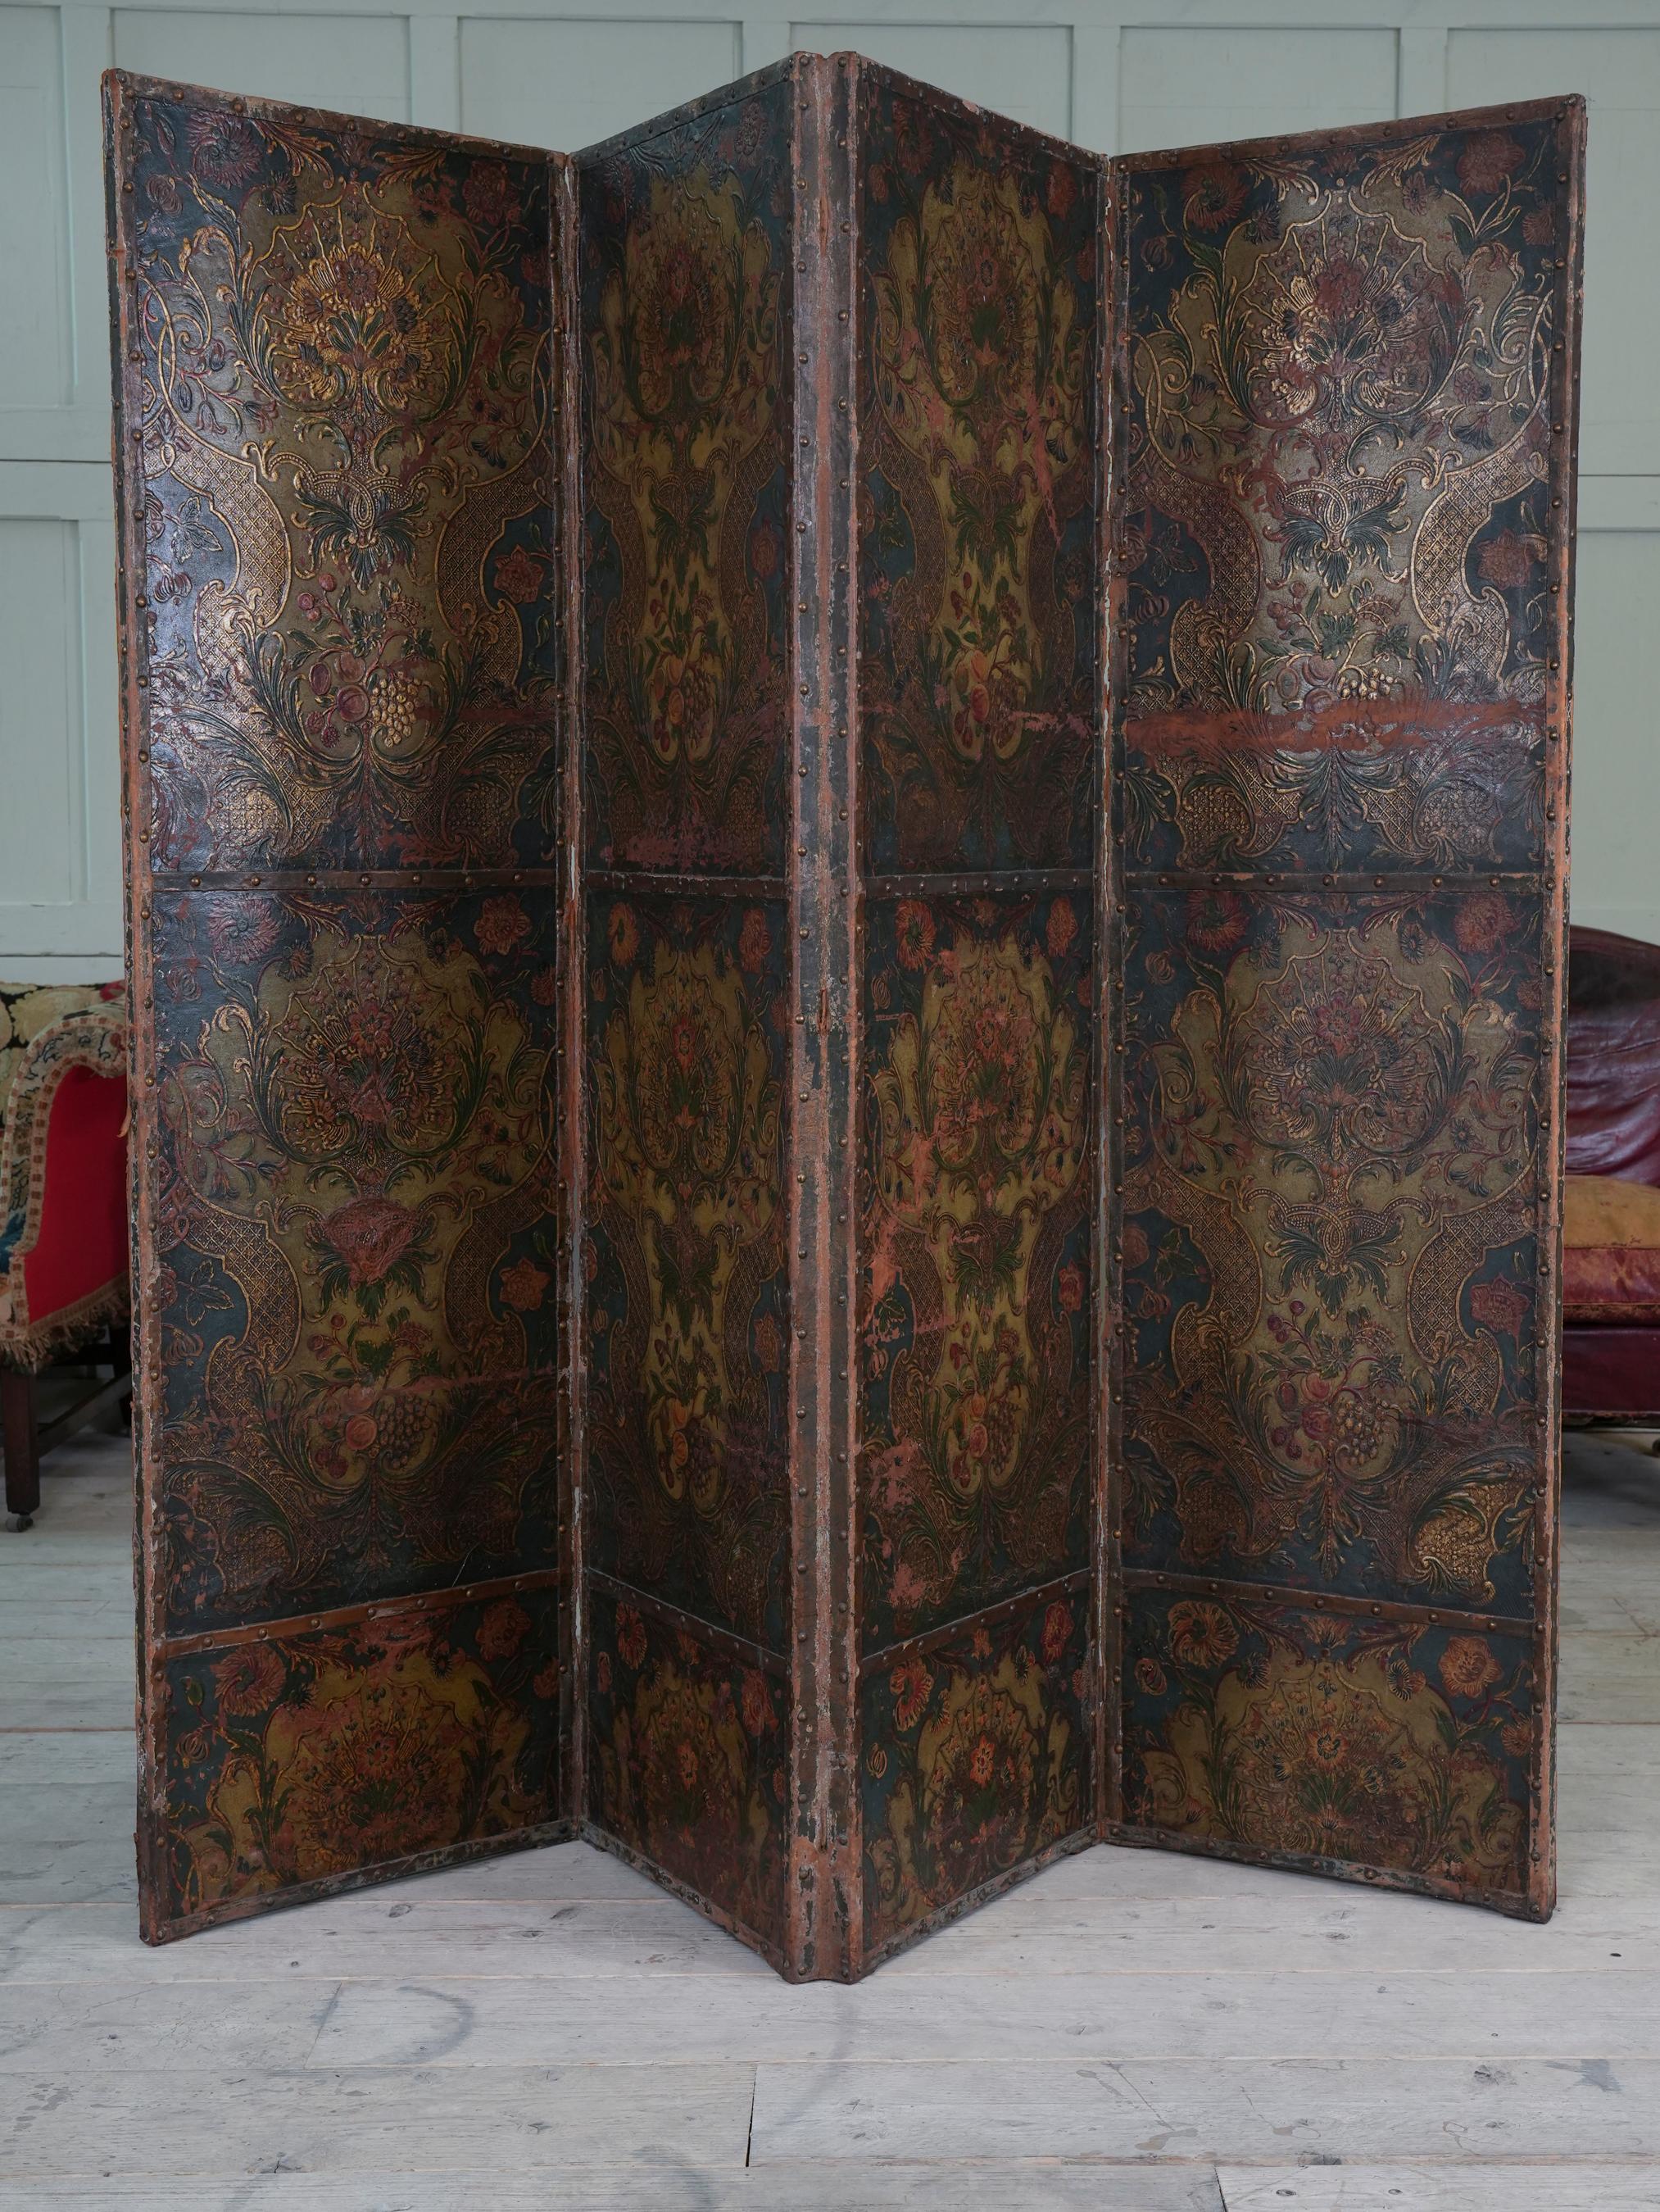 The four fold screen decorated to a single side with a repeating floral design on a dark blue ground.

Superb wall hanging decoration.